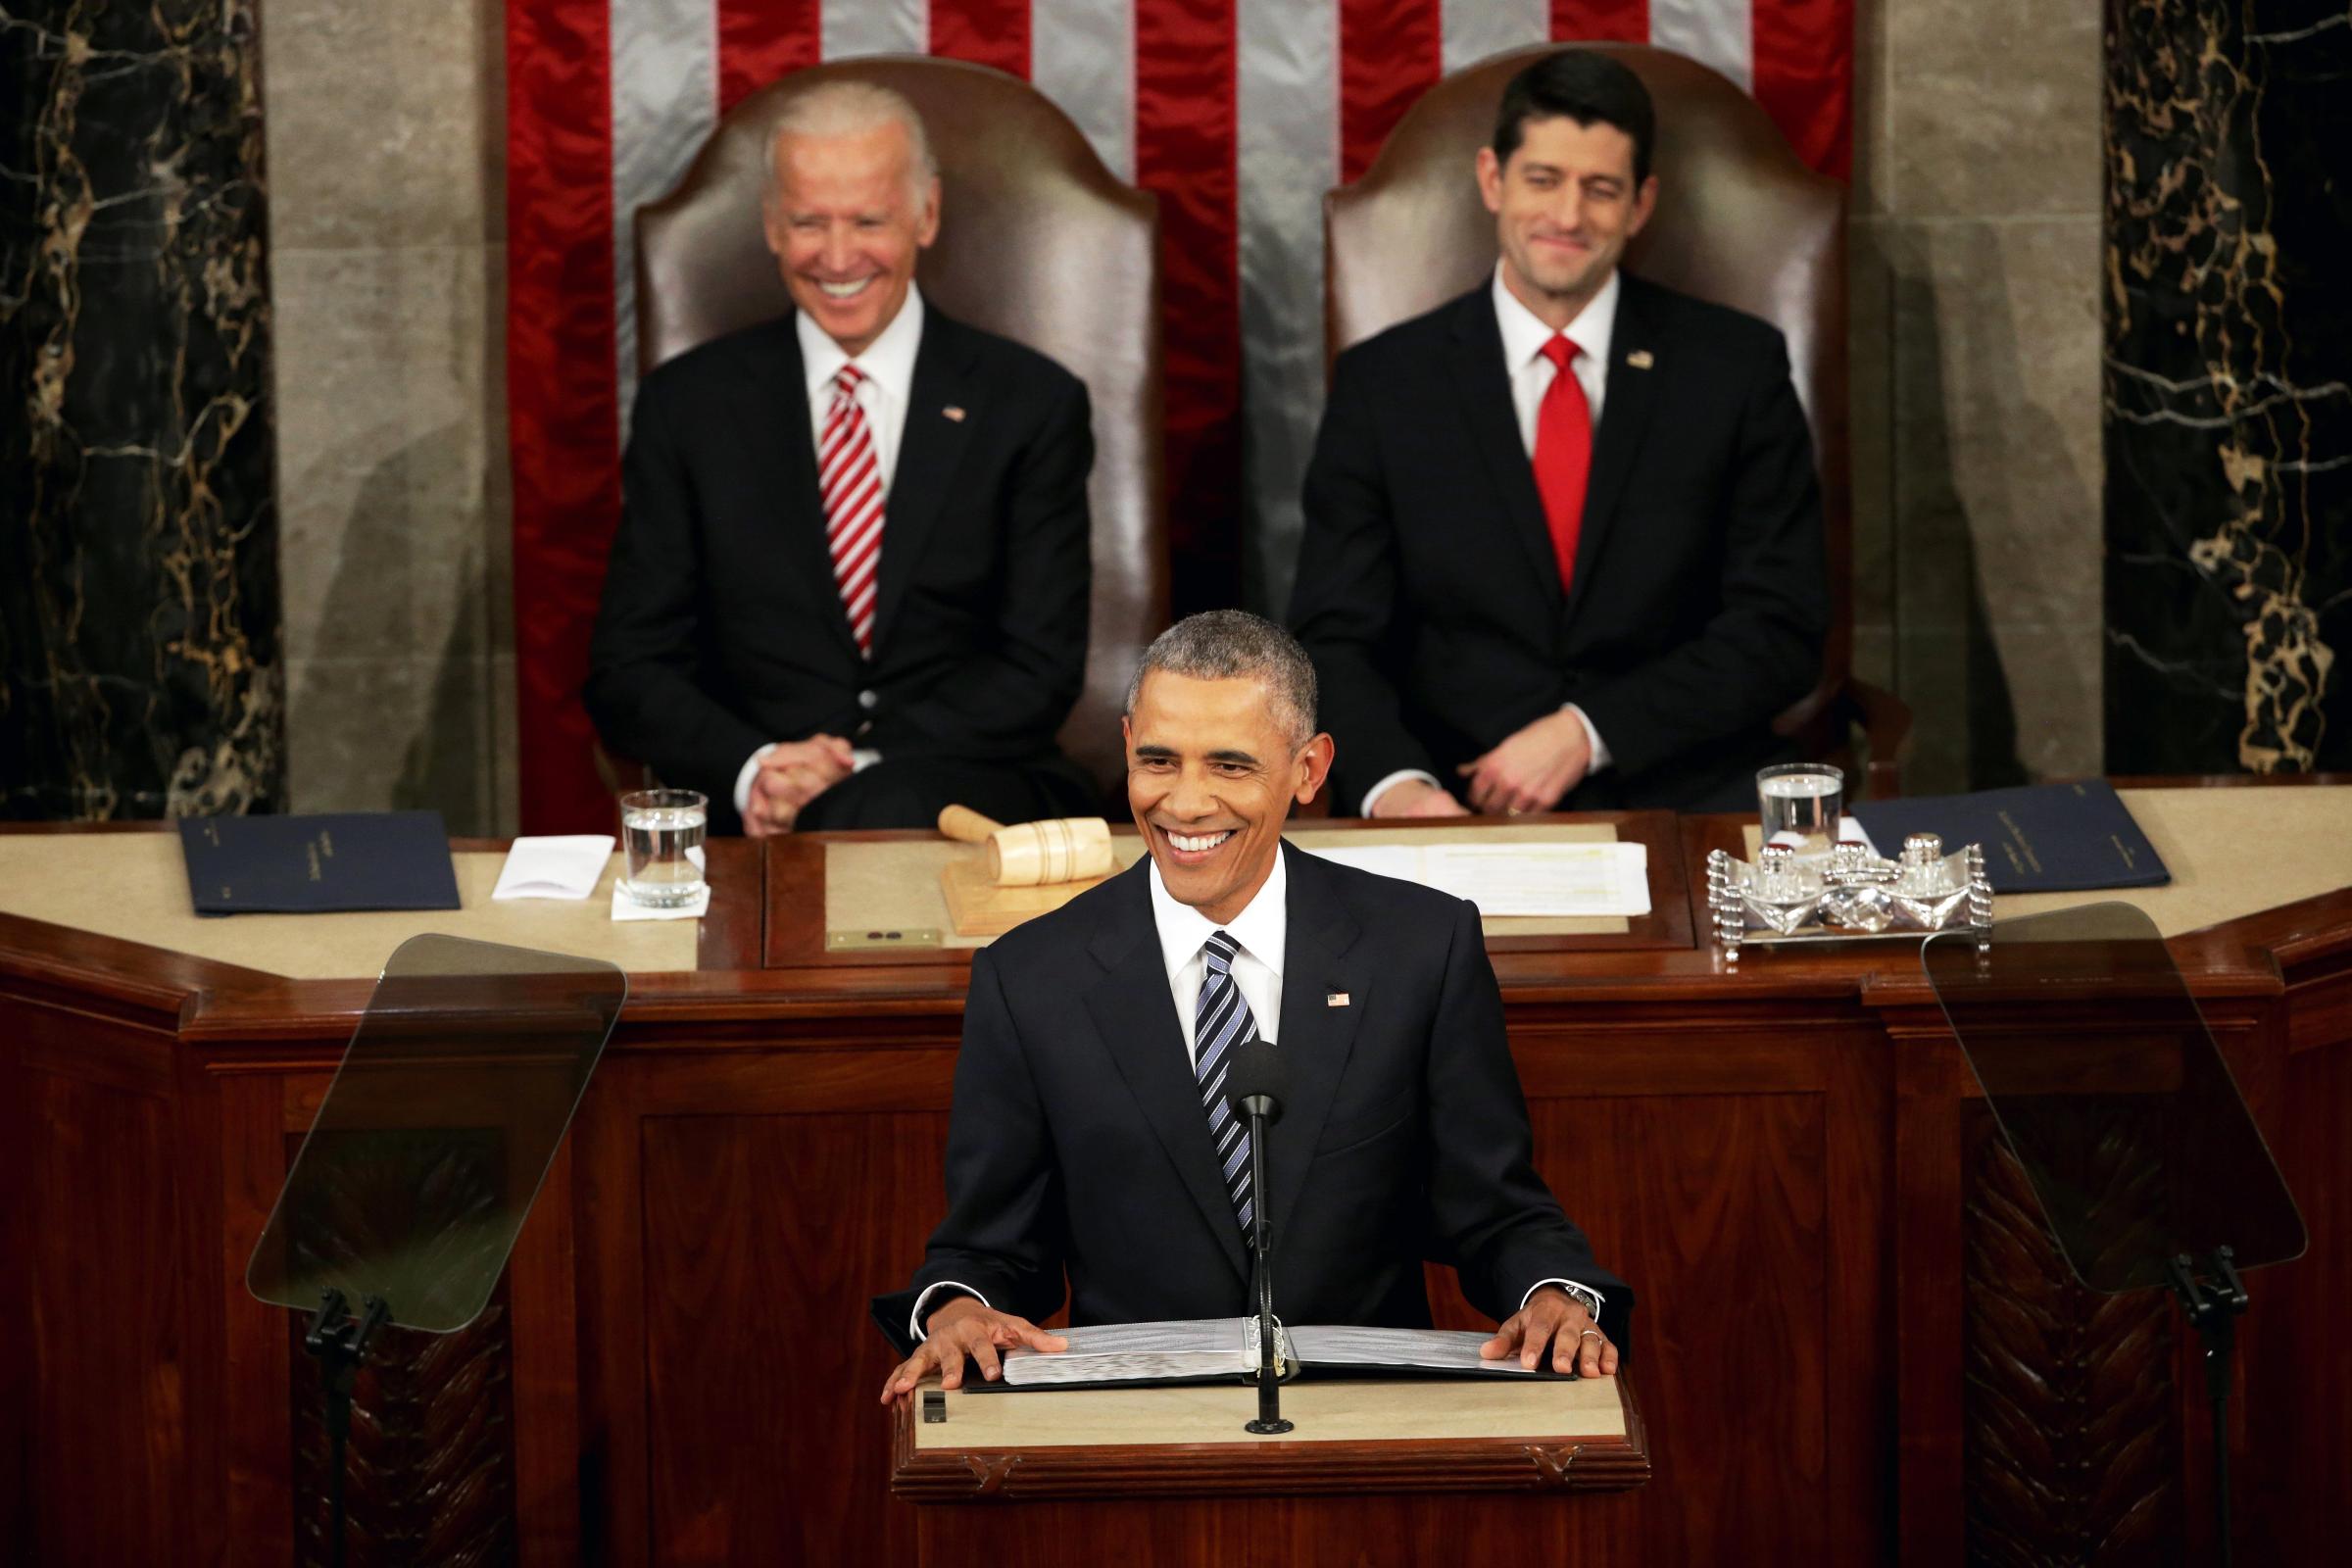 President Barack Obama delivers the State of the Union speech before members of Congress in the House chamber of the U.S. Capitol Jan. 12, 2016 in Washington.